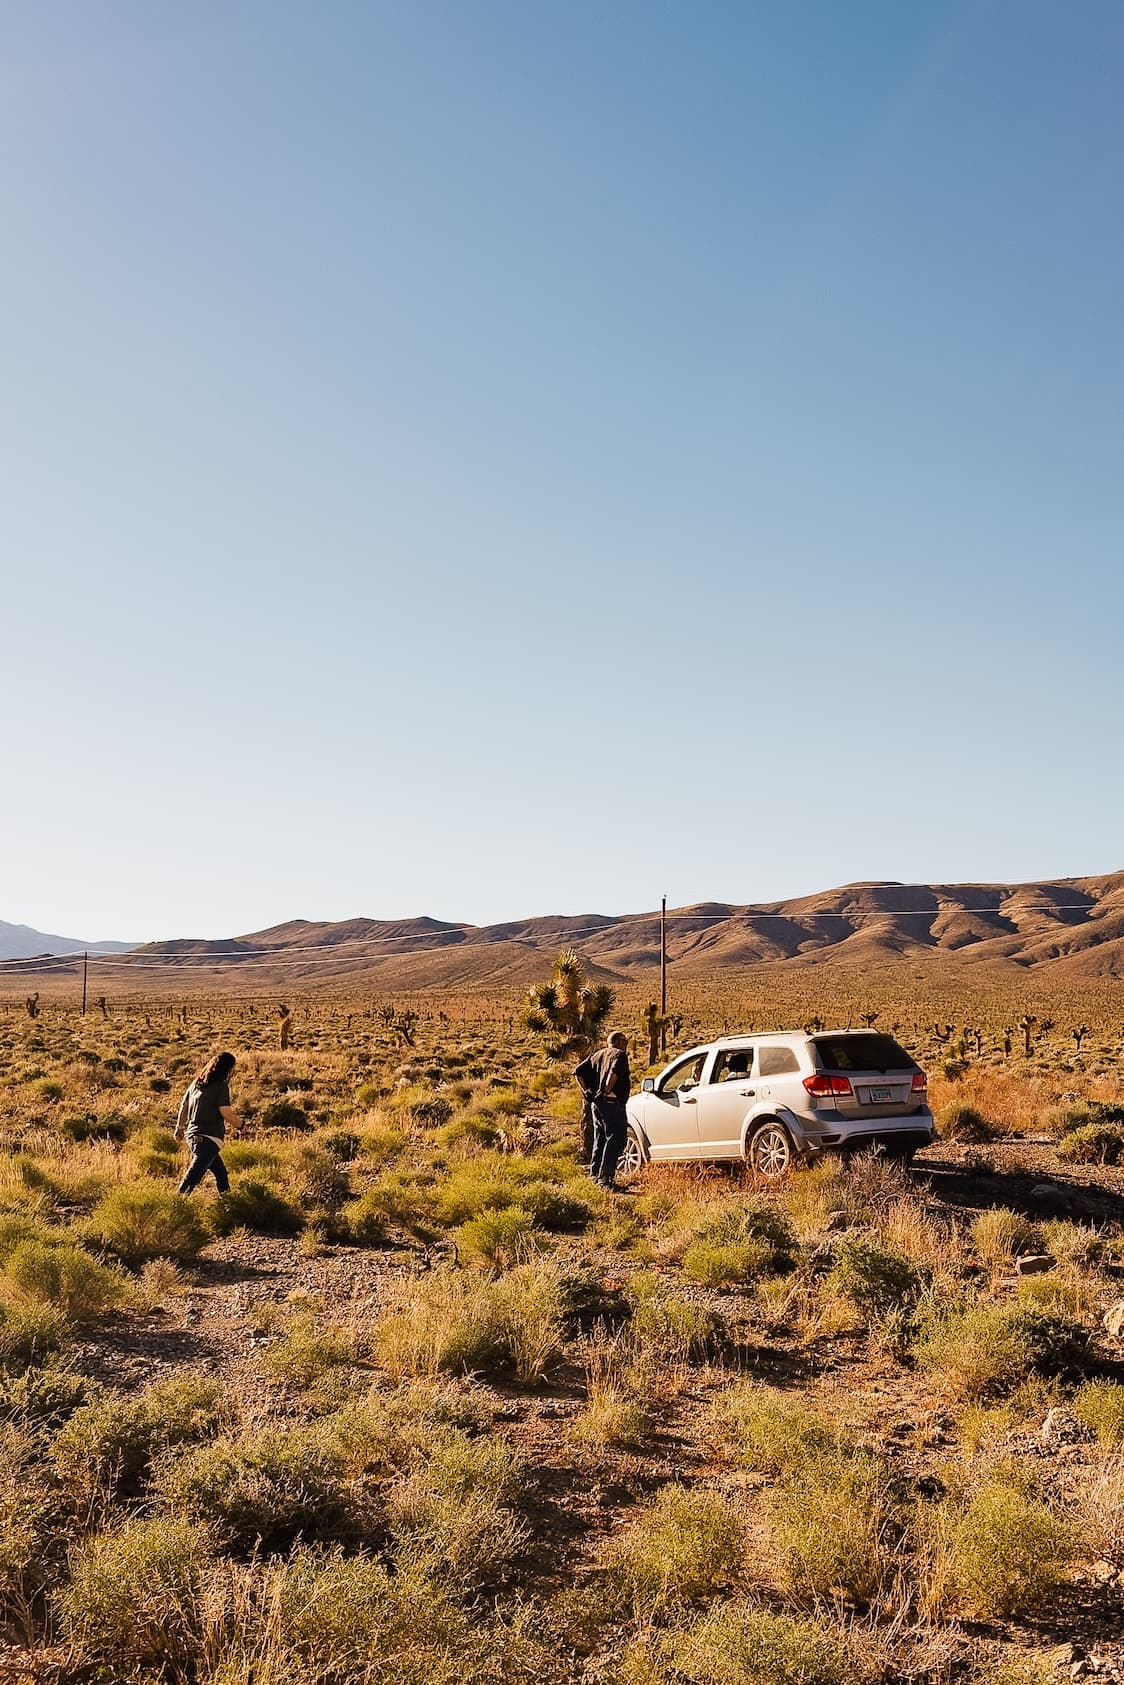 Two individuals, a man closest, a woman further out, approach the SUV in a desert landscape with Joshua trees and rolling hills in the background.